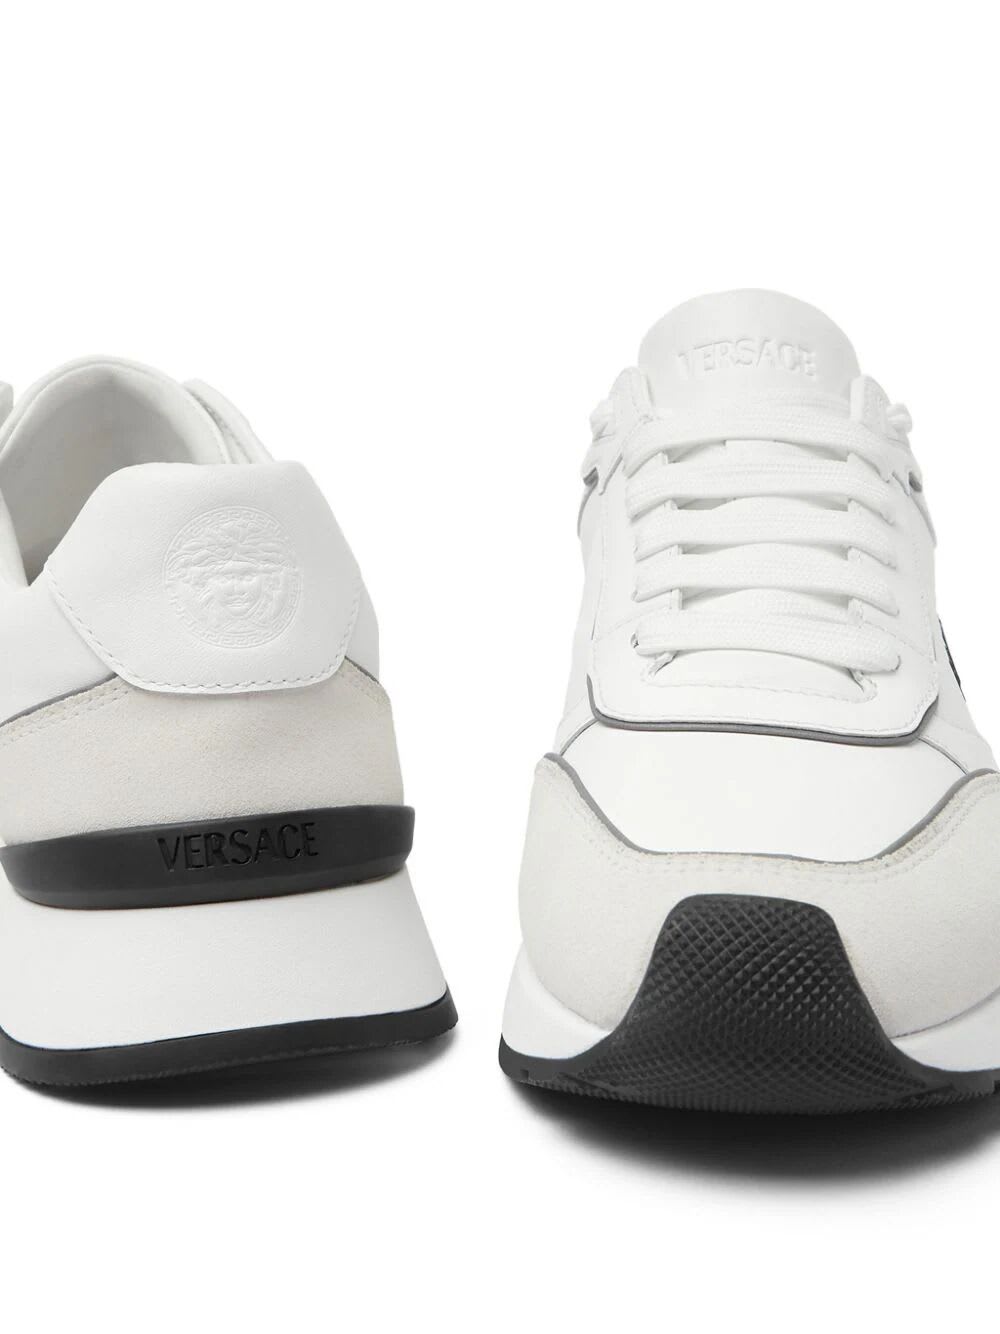 Shop Versace Sneaker Calf Leather+suede+ Embroidery In White